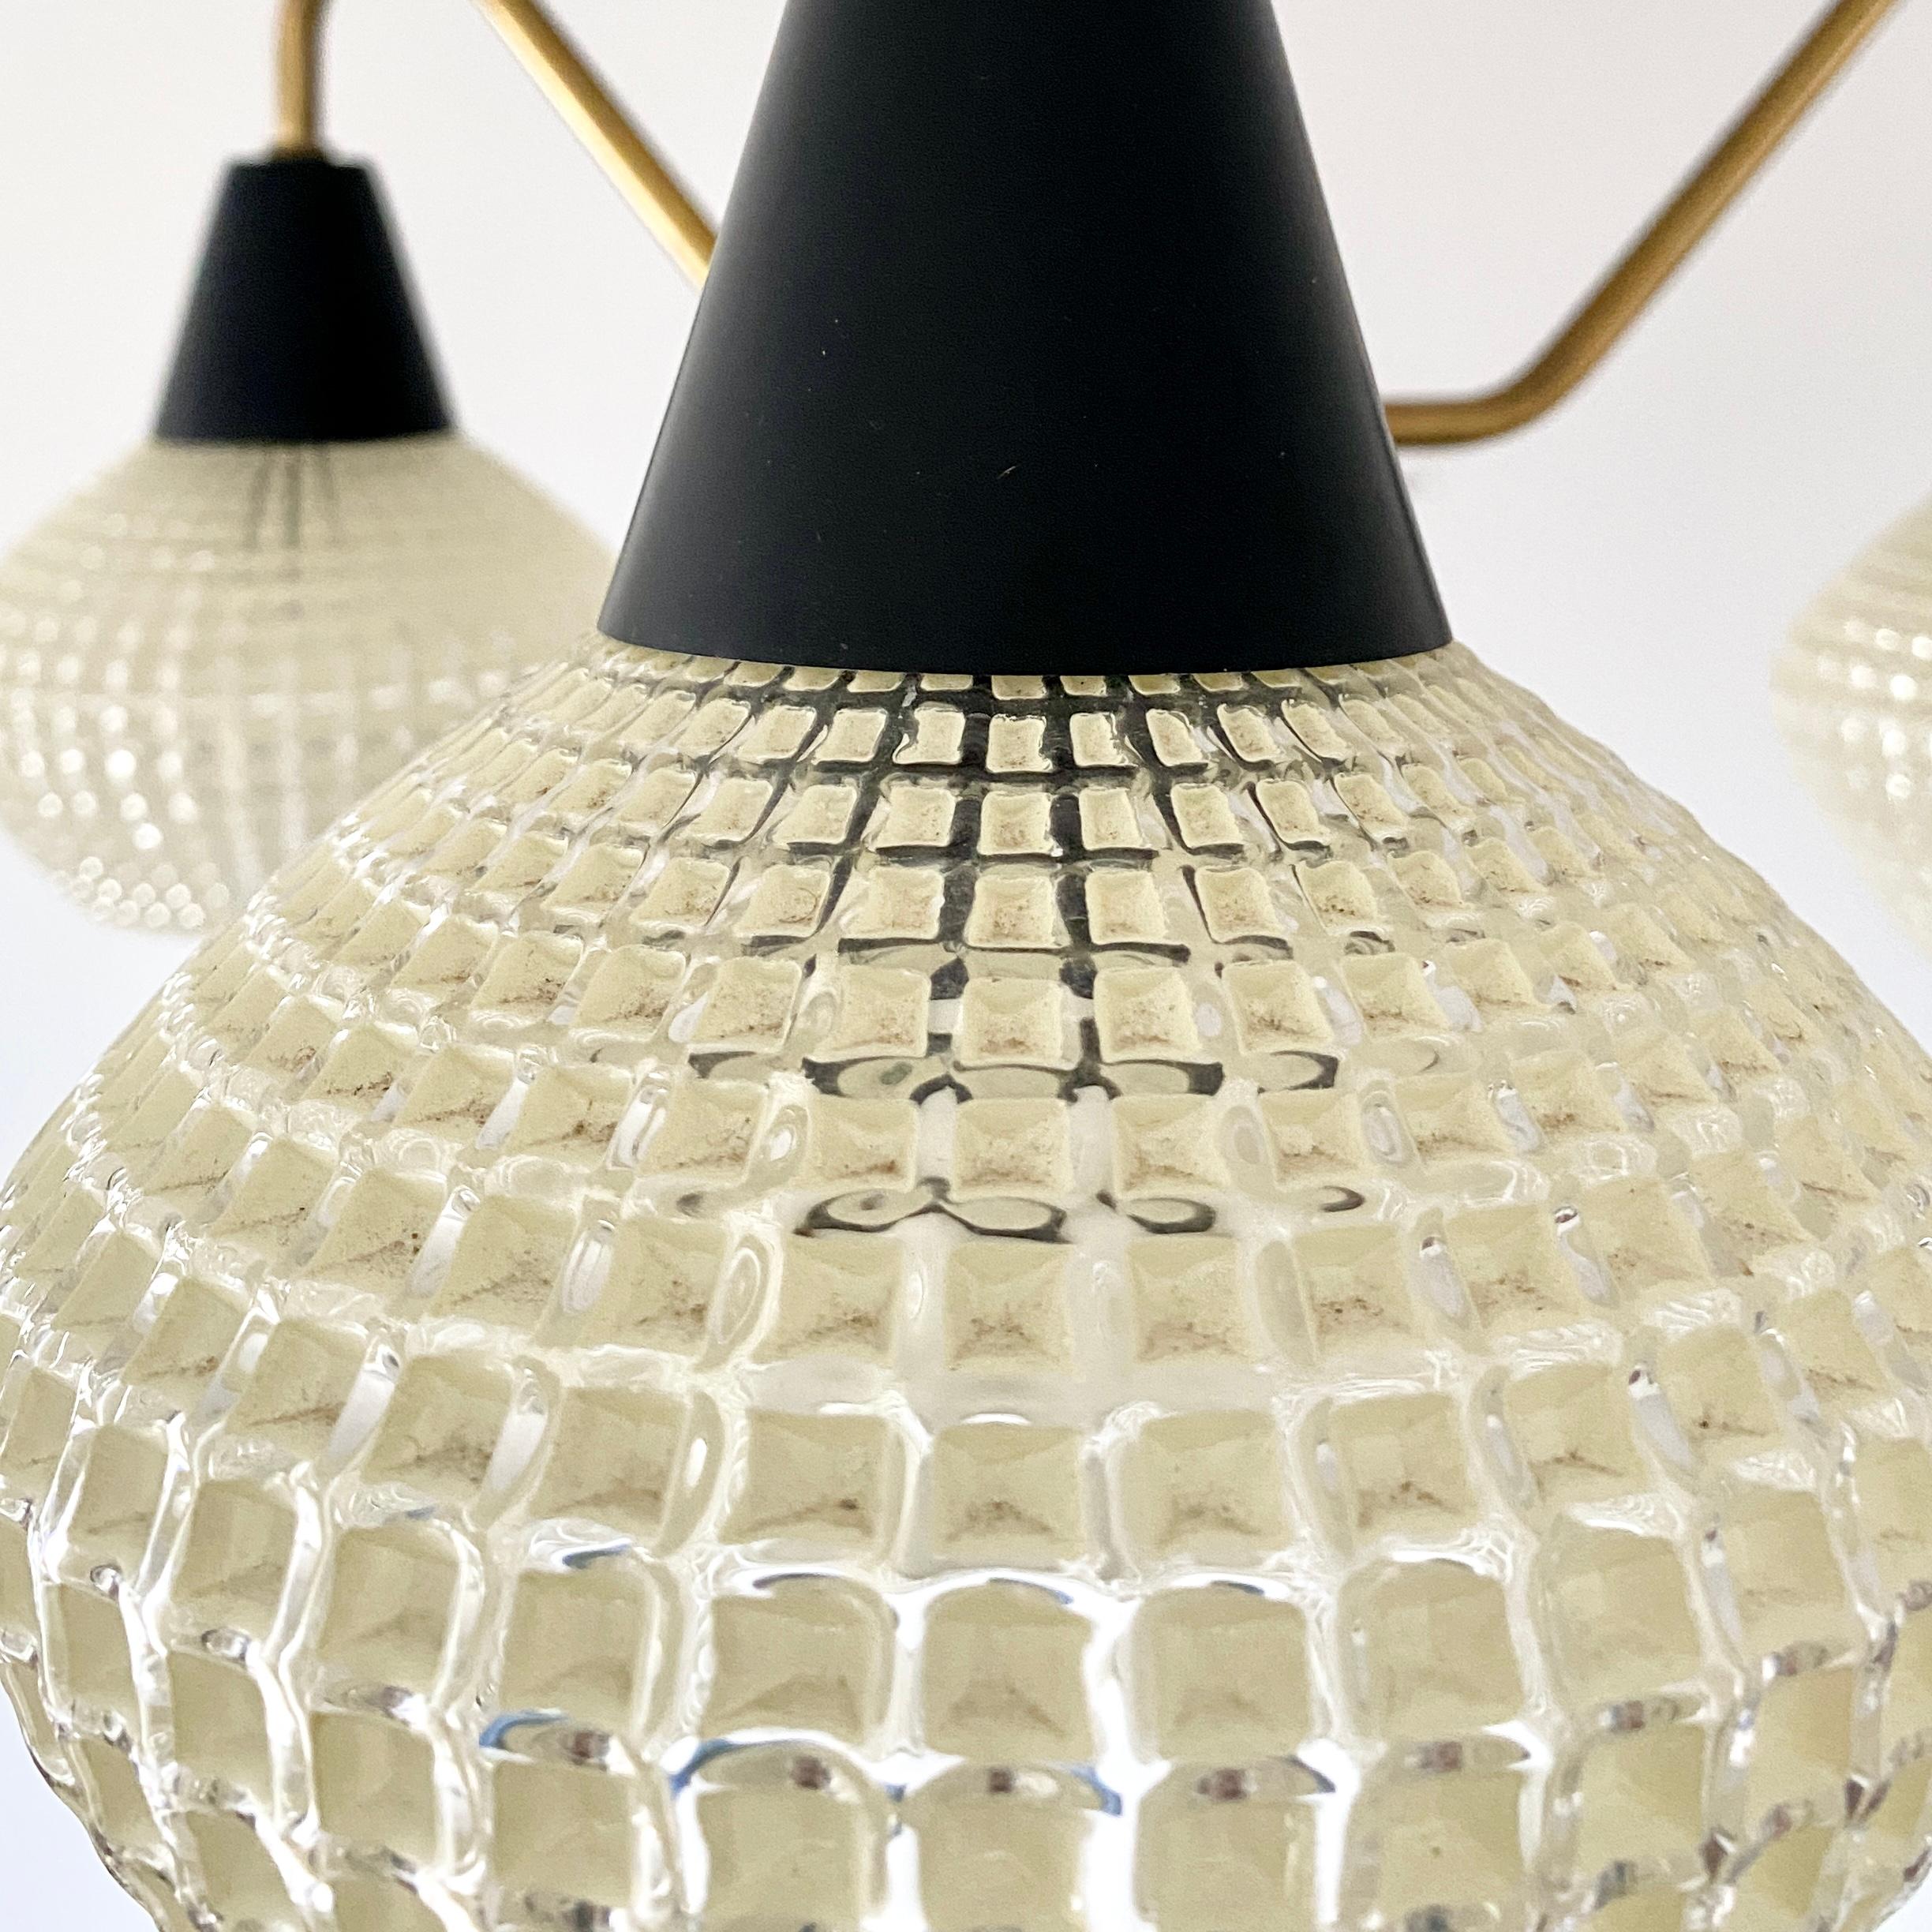 20th Century Danish Mid-Century Modern Three-Arm Chandelier with Glass Shades For Sale